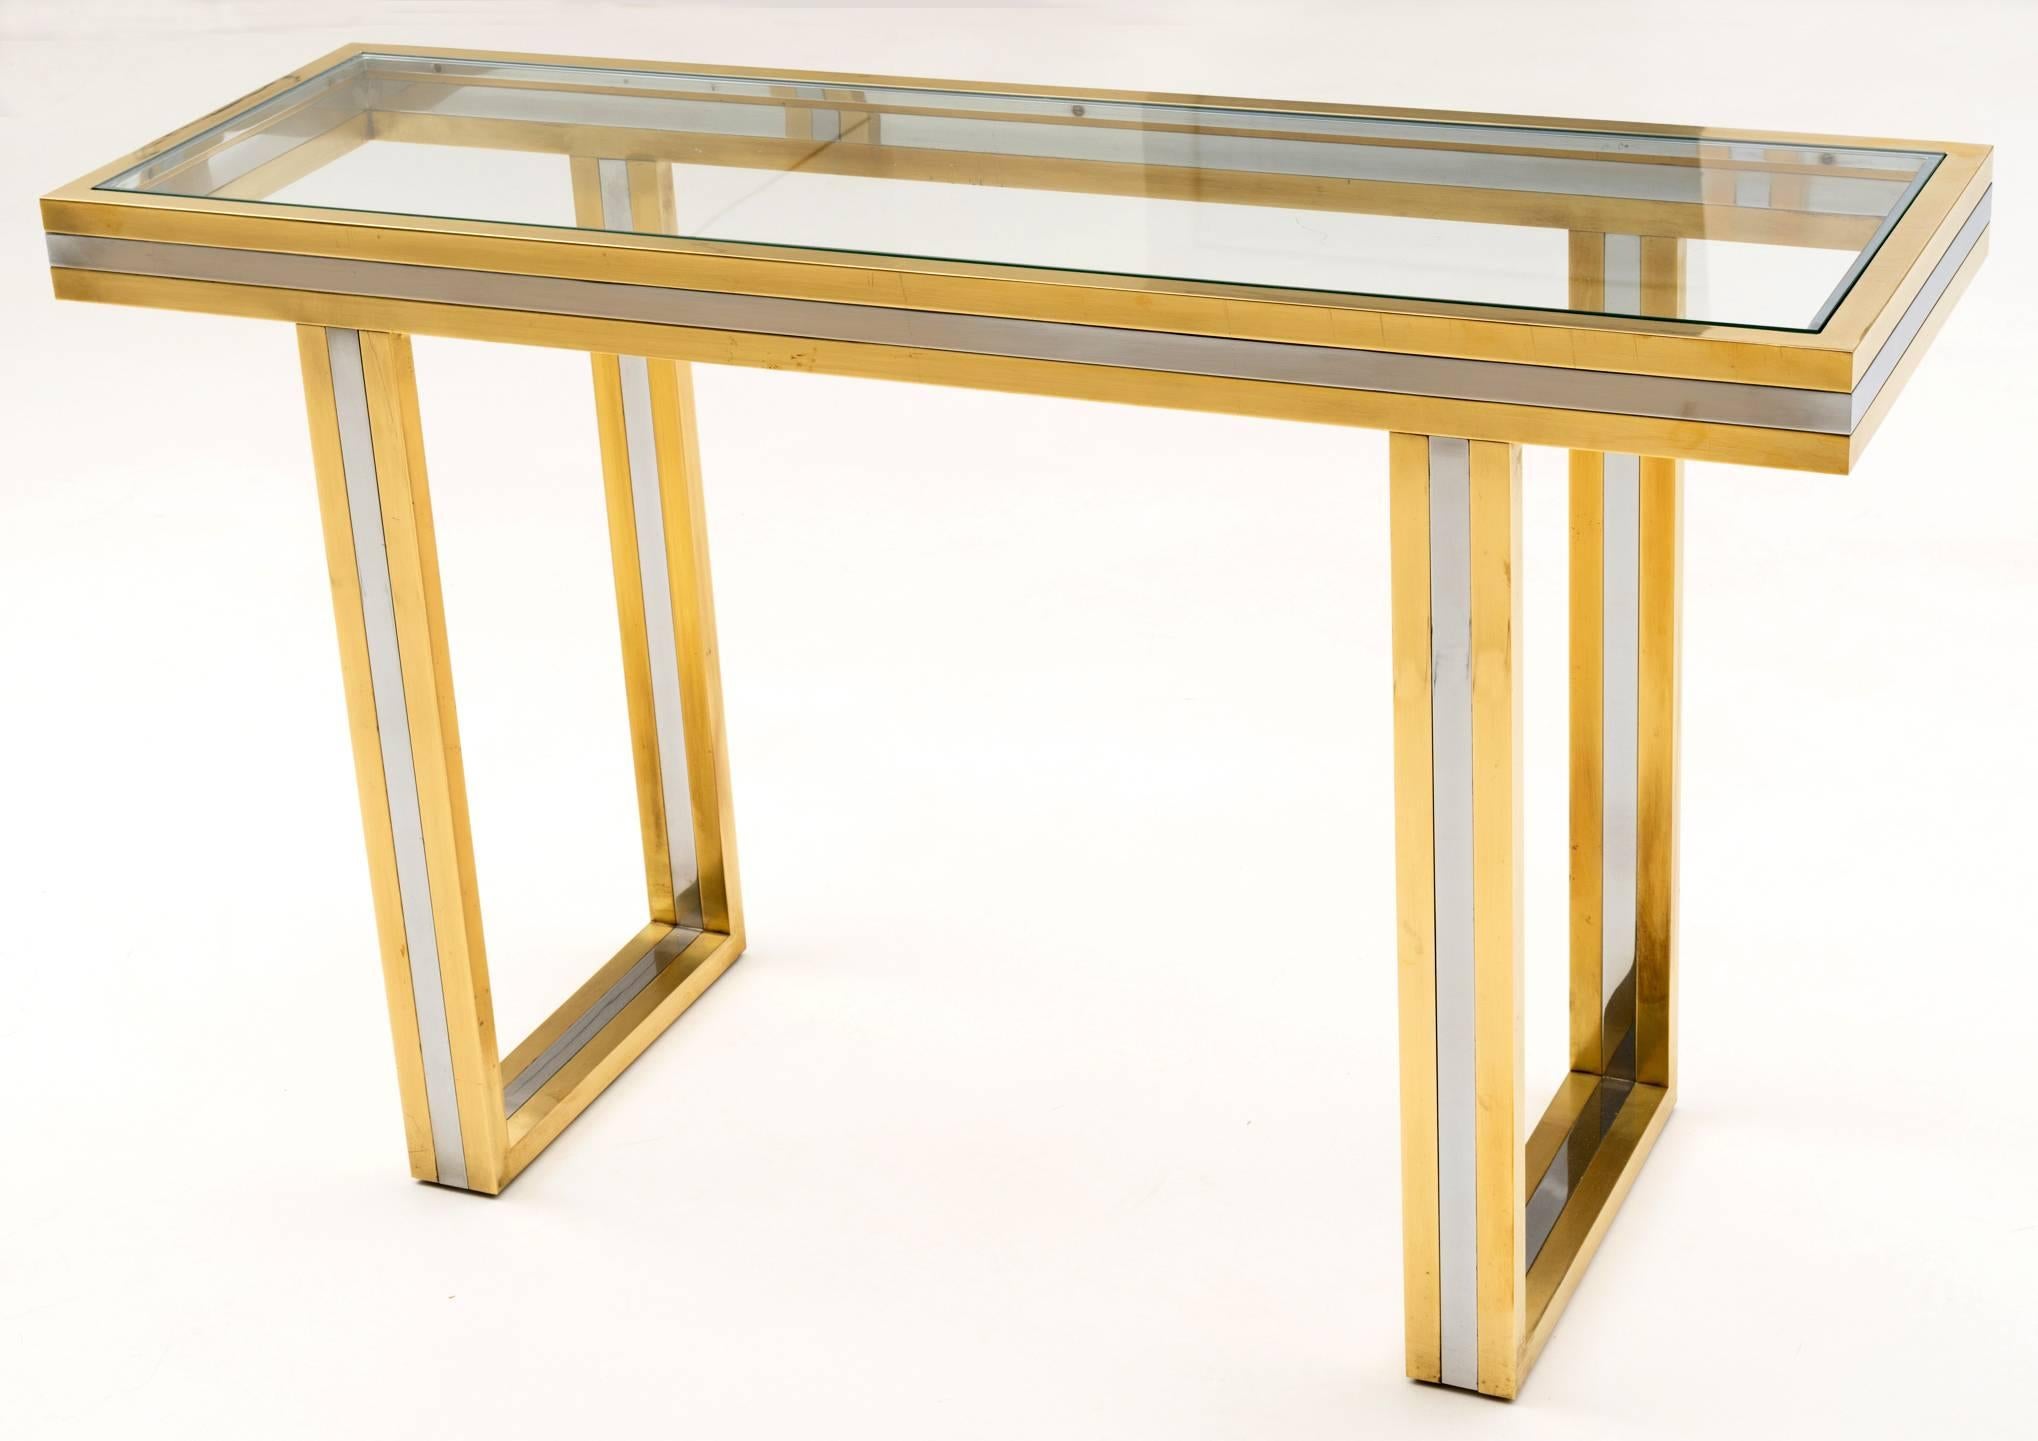 Super Elegant Maison Jansen Brass and Chrome Console Table circa 1970's.  Great weight with simple but elegant design in silver and gold.